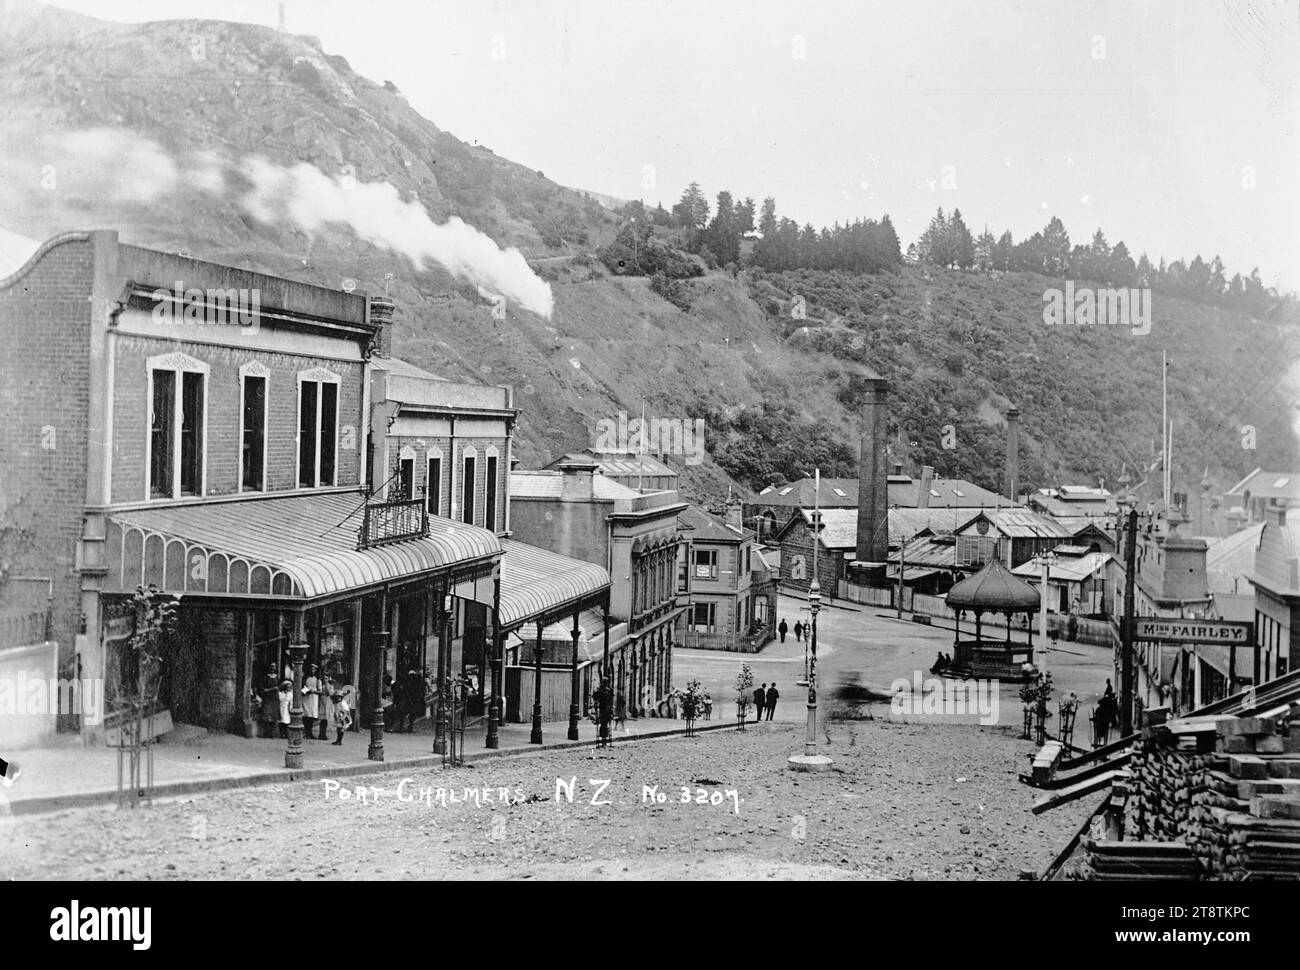 View of Port Chalmers township, View of Port Chalmers township looking down Grey Street towards the band rotunda at the junction of George, Grey and Beach Streets. Commercial buildings line both sides of the street, and there is smoke coming from a tall factory chimney to the left of the band rotunda. The premises of McEwan's (boot makers) are on the left, and Miss Fairley's (refreshment rooms) are on the right. in the early 1900s Stock Photo